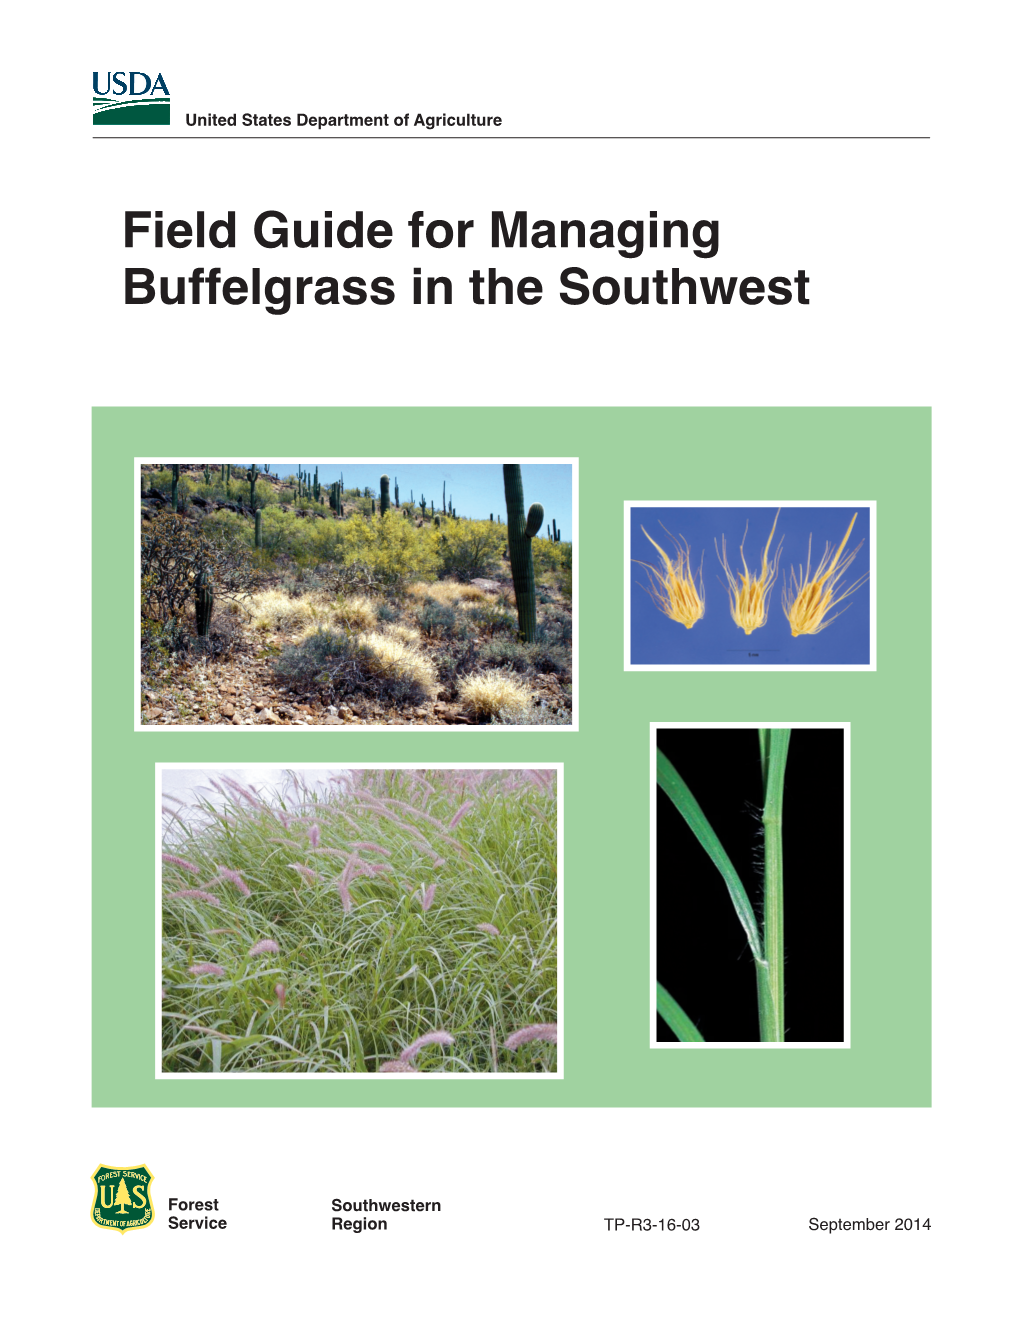 Managing Buffelgrass in the Southwest